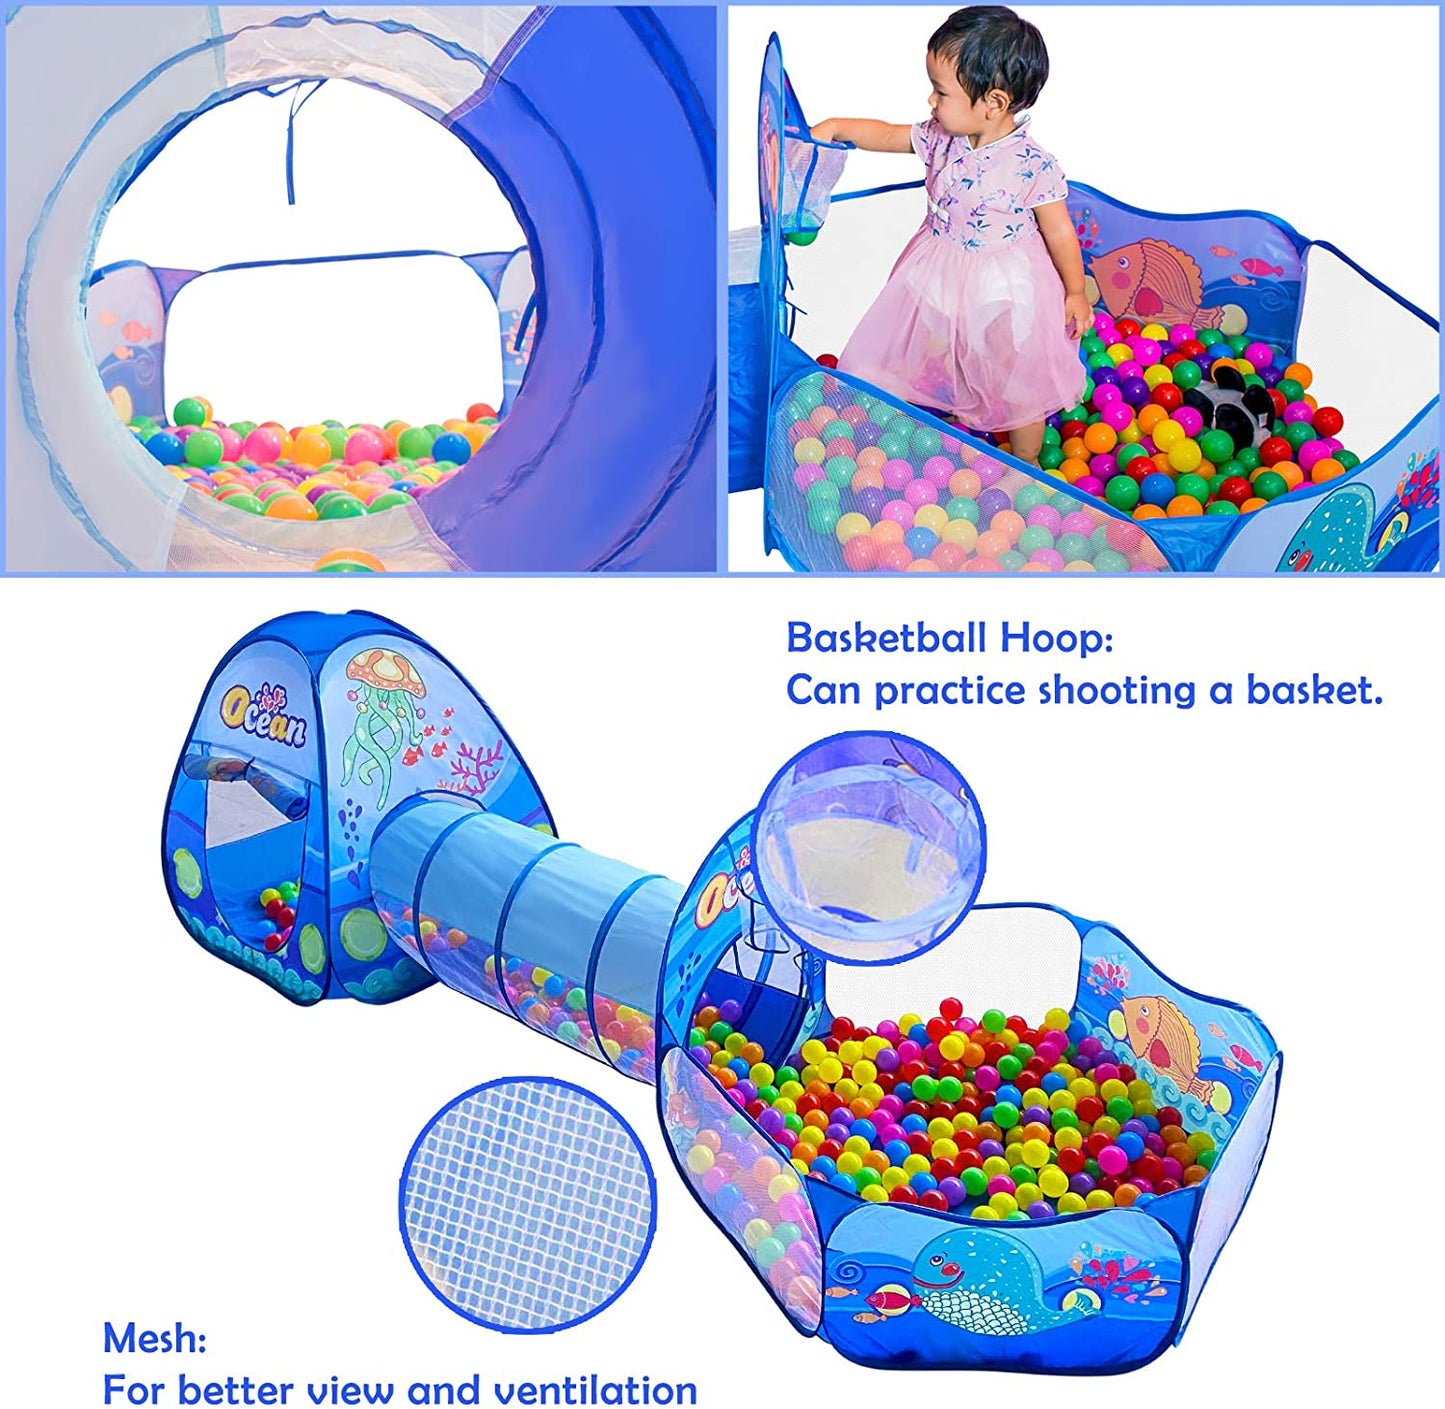 3 in 1 Kids Play Tent with Tunnel, Ball Pit, Basketball Hoop for Boys & Girls, Toddler Pop up Playhouse Toy Baby Indoor/Outdoor, Gift Year Old Child (3 Tent)